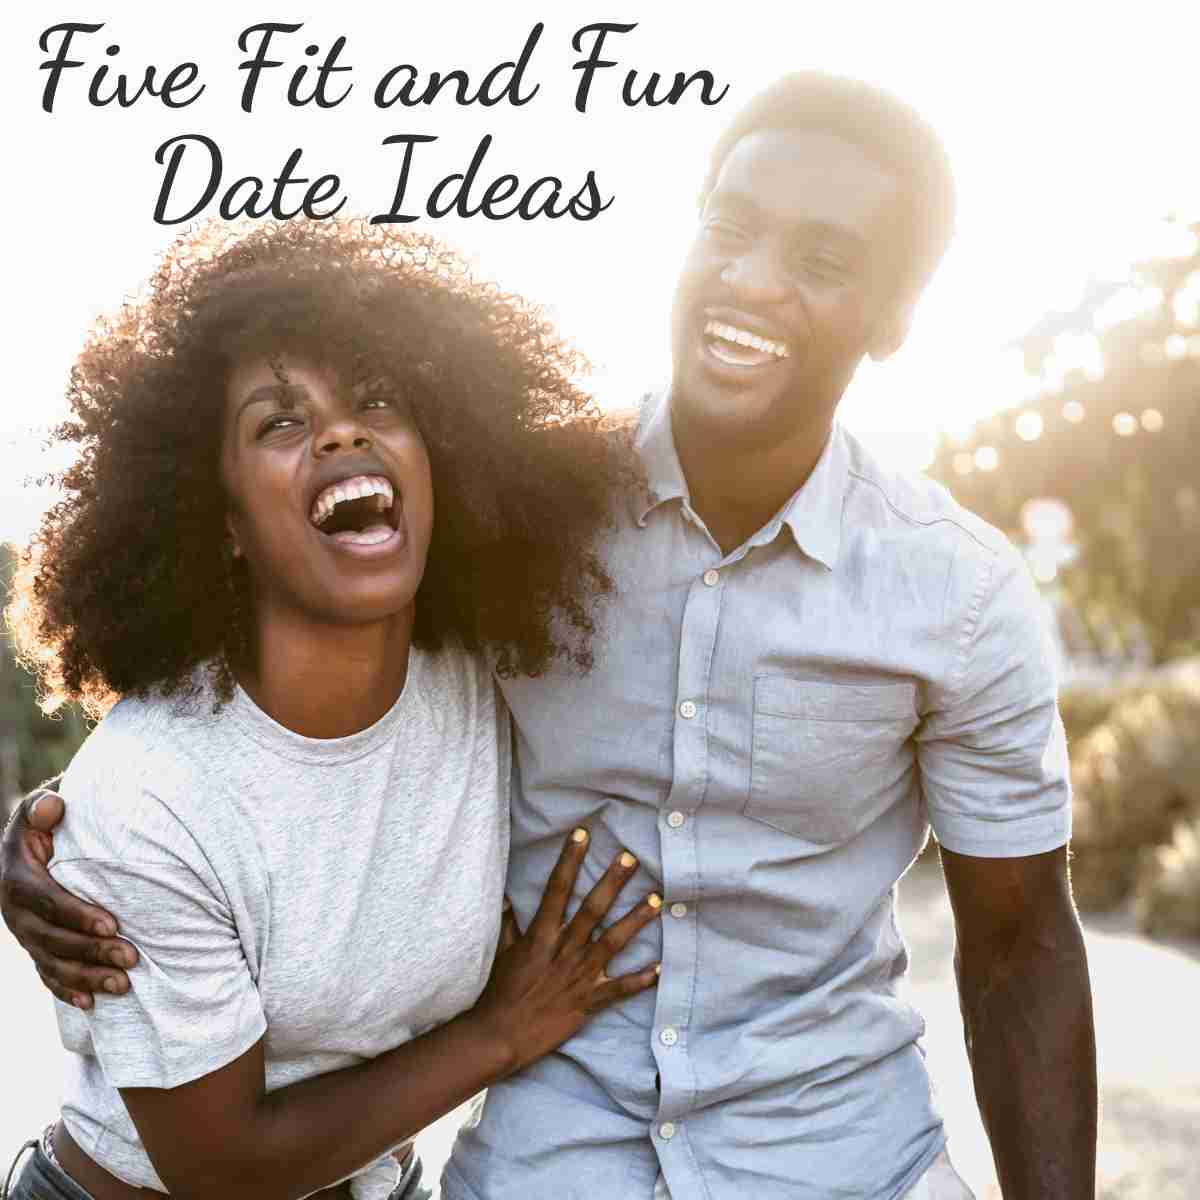 Five Fit and Fun Date Ideas